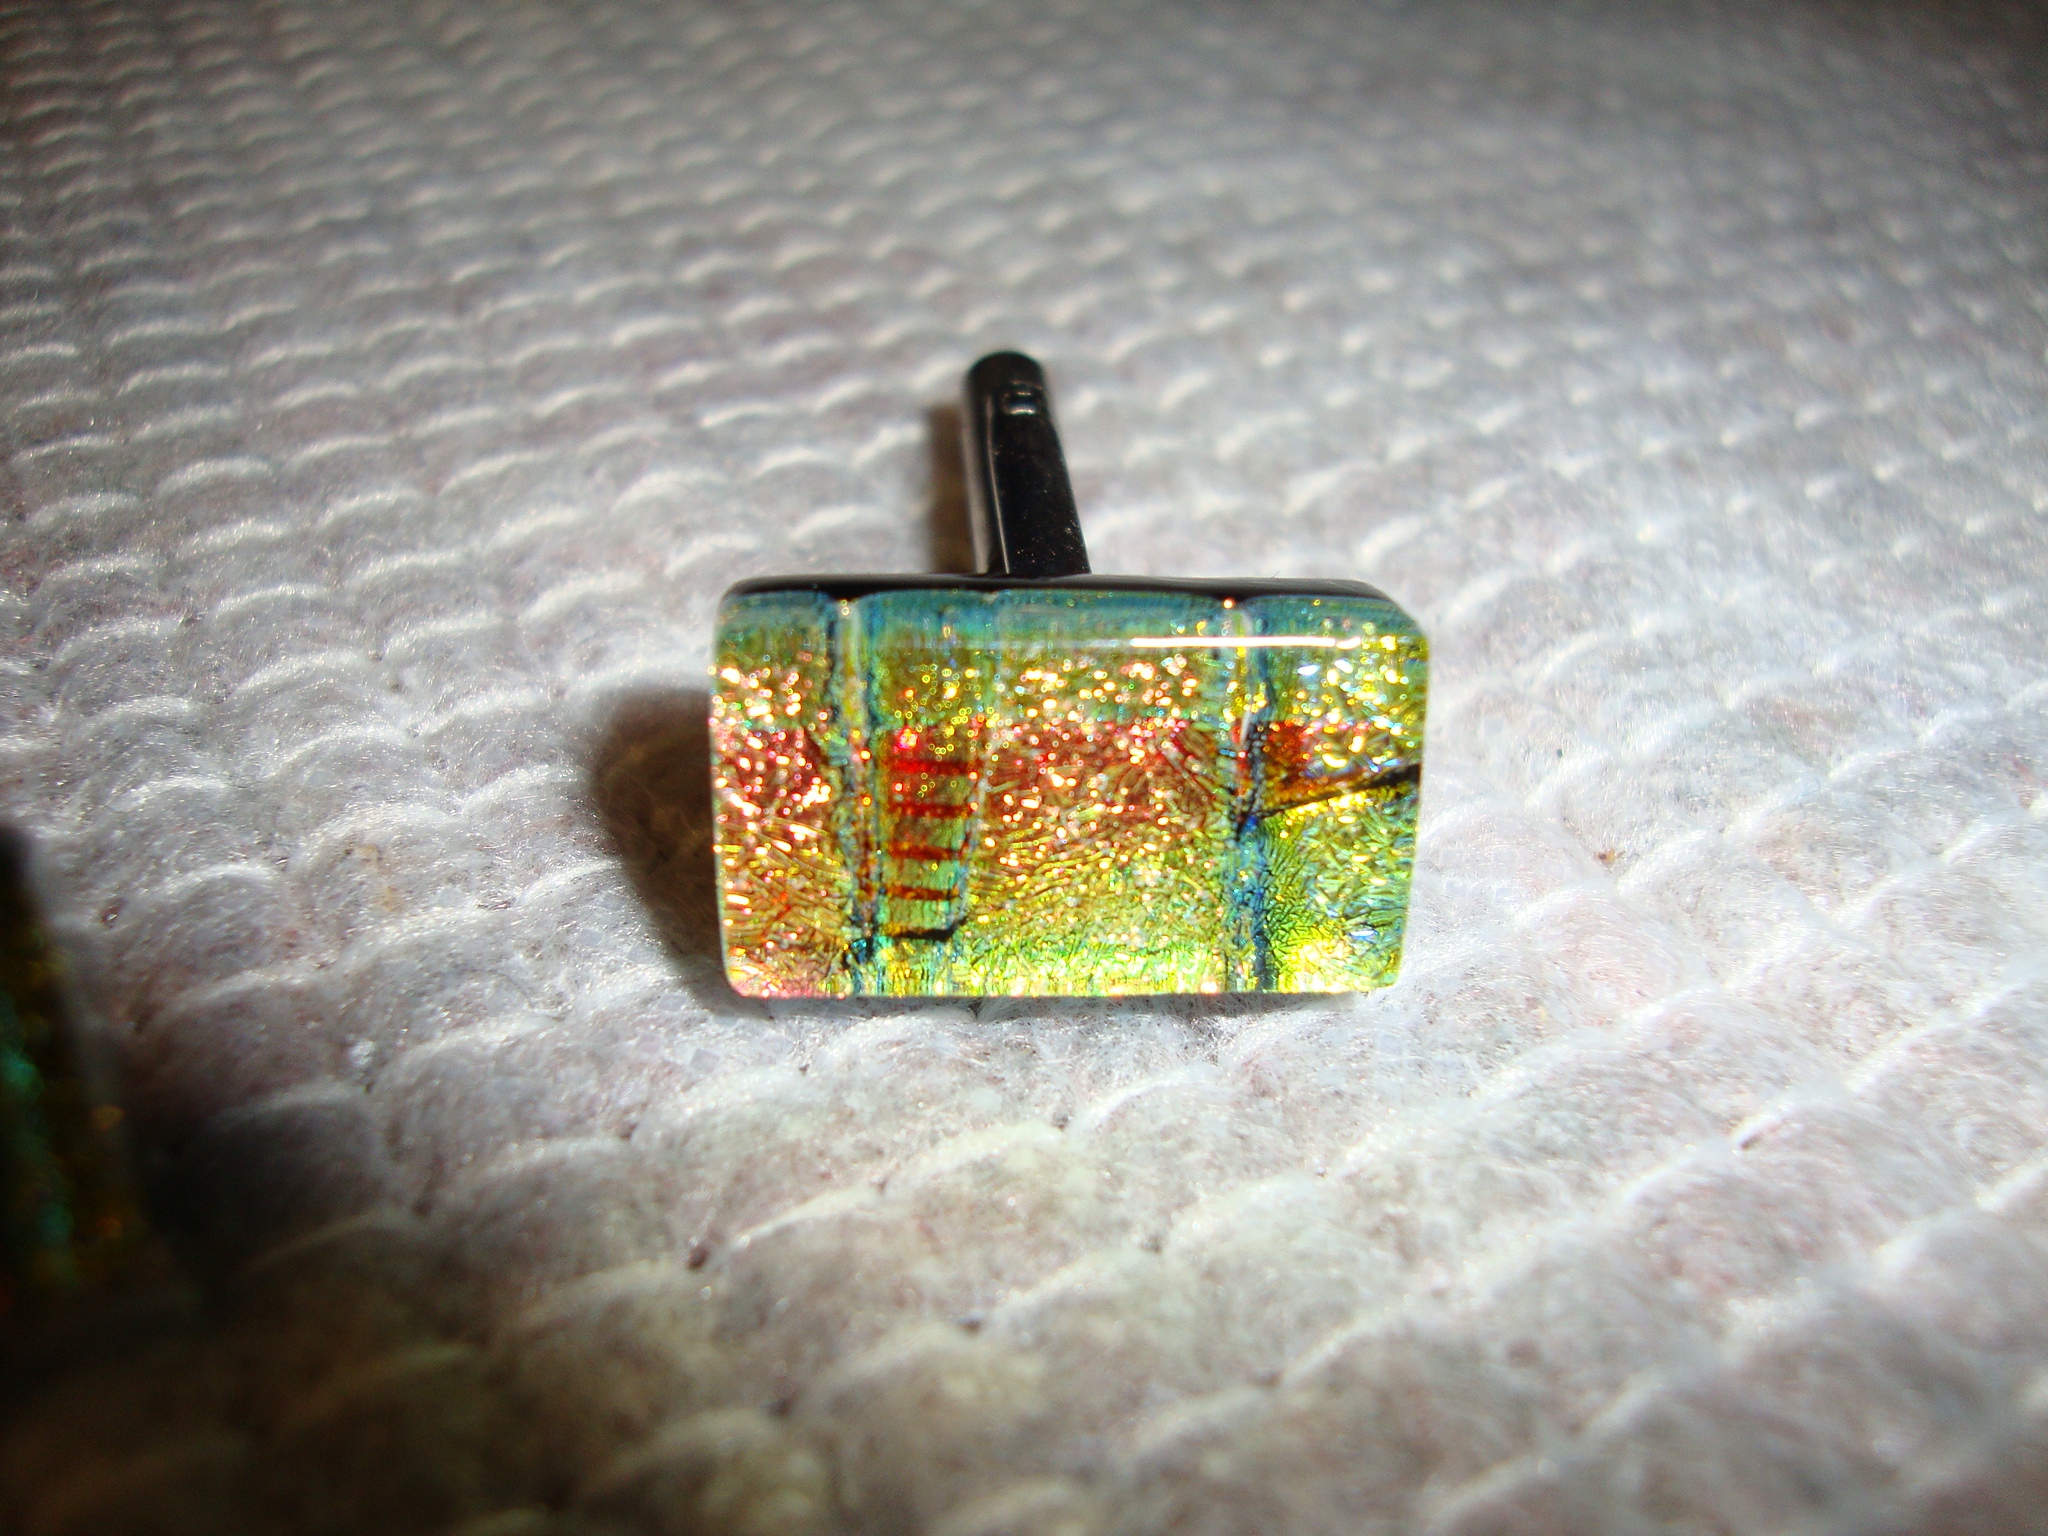 Pair of cufflinks understood to be handmade in glass - Image 3 of 4